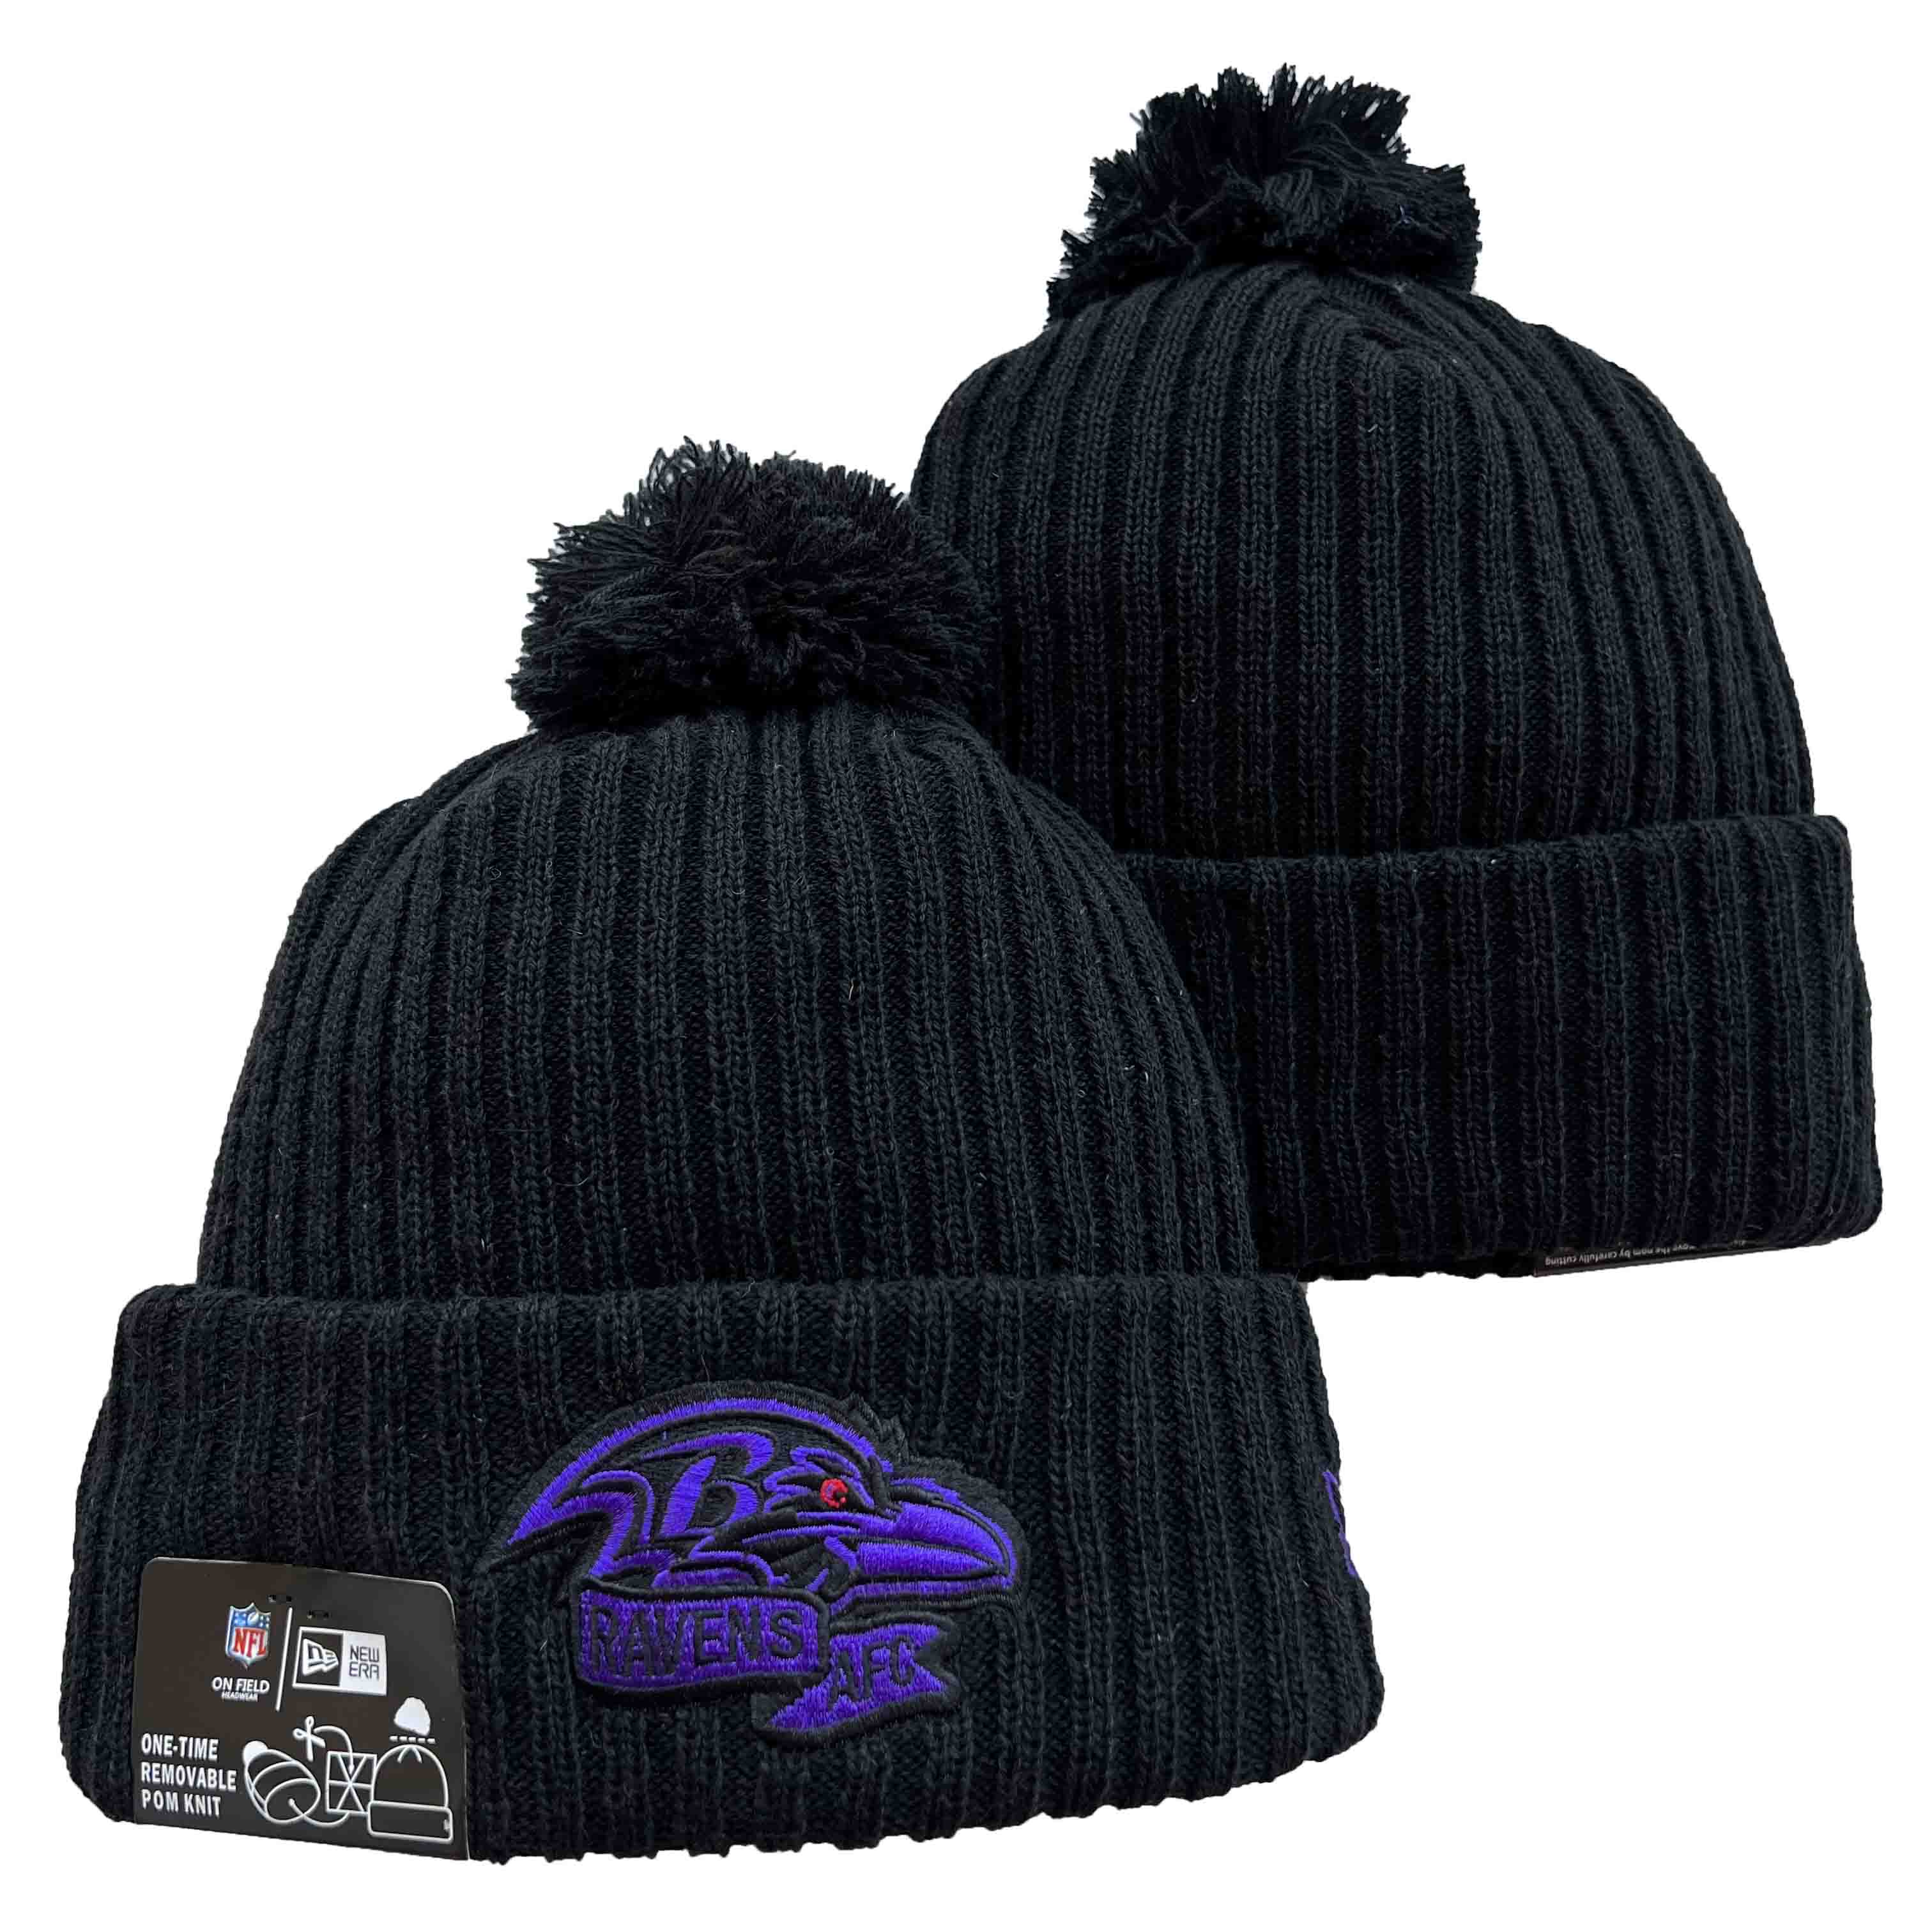 NFL Baltimore Ravens Beanies Knit Hats-YD1191